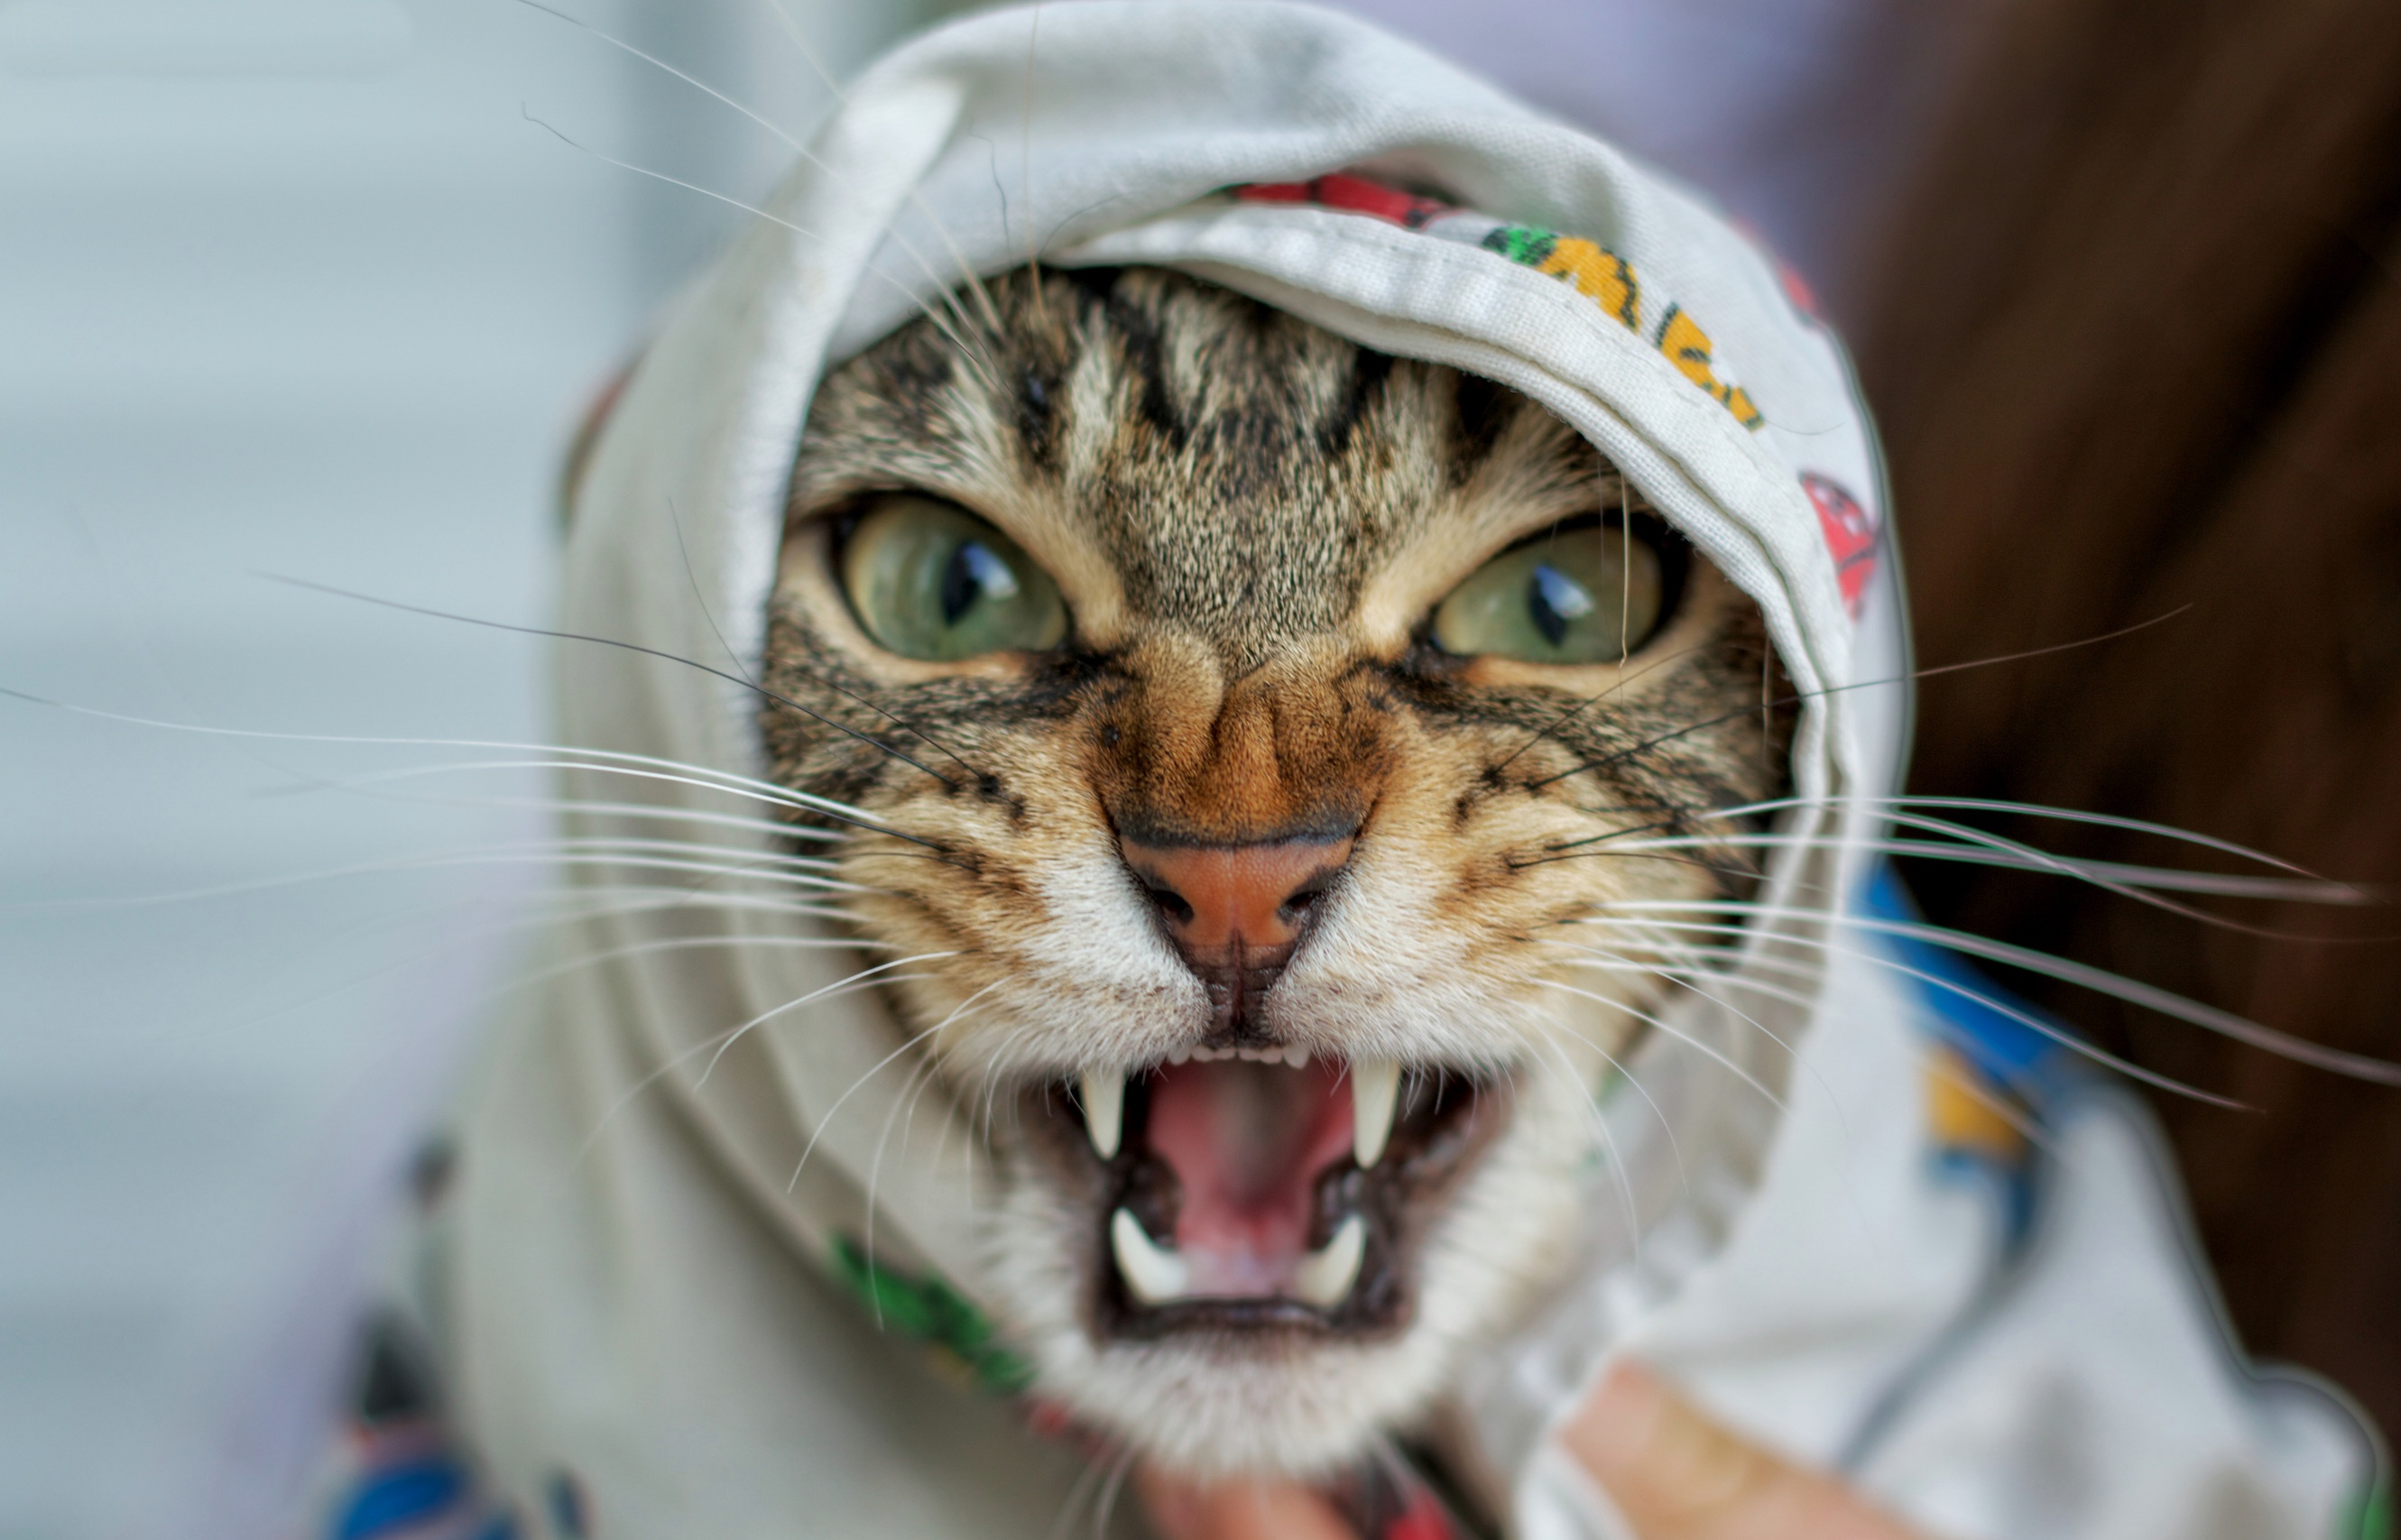 Caturday pic of a cat snarling wrapped in cloth